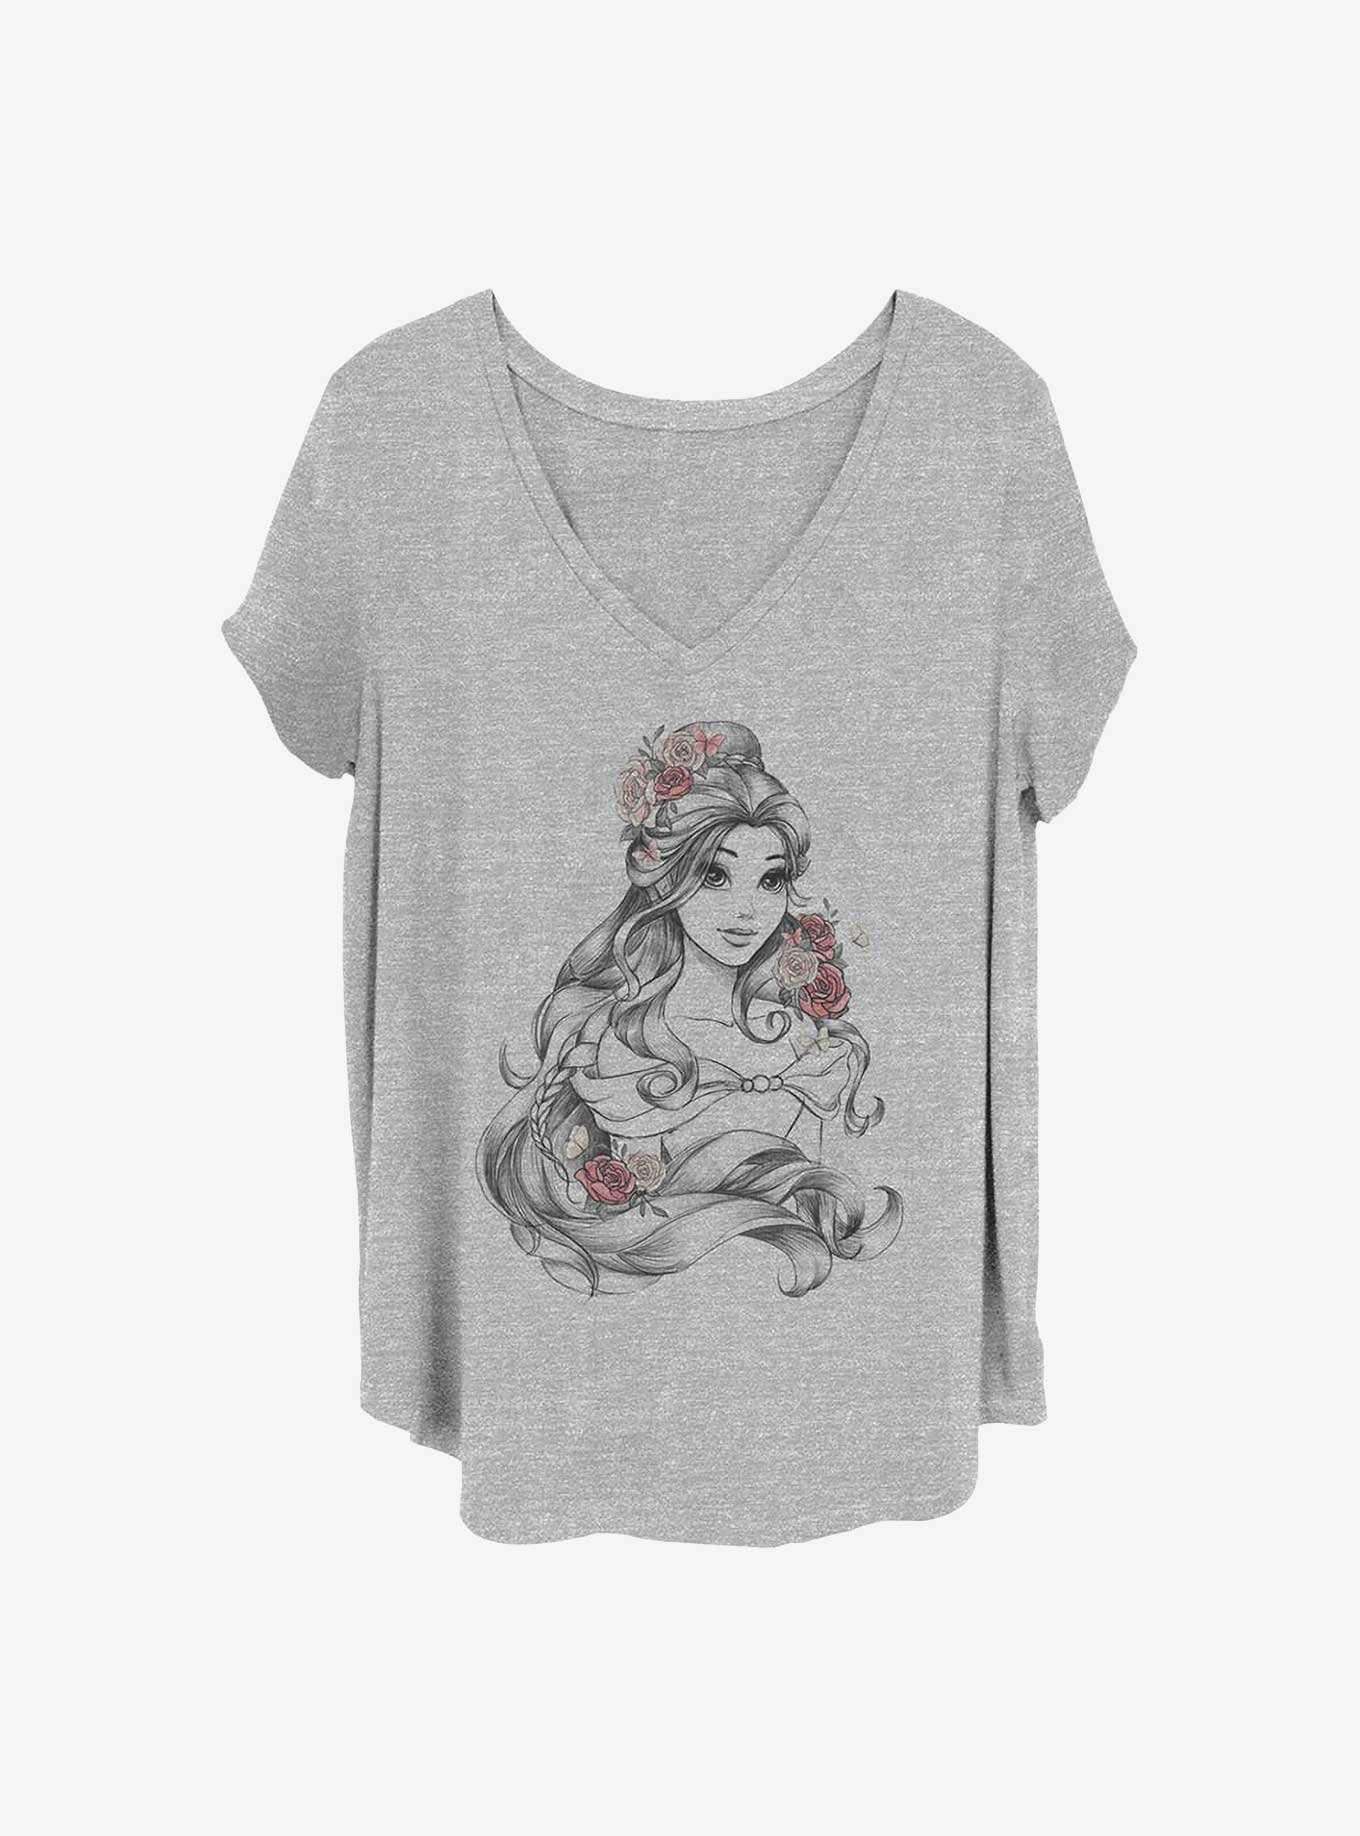 Disney Beauty and the Beast Beauty Flower Girls T-Shirt Plus Size, HEATHER GR, hi-res